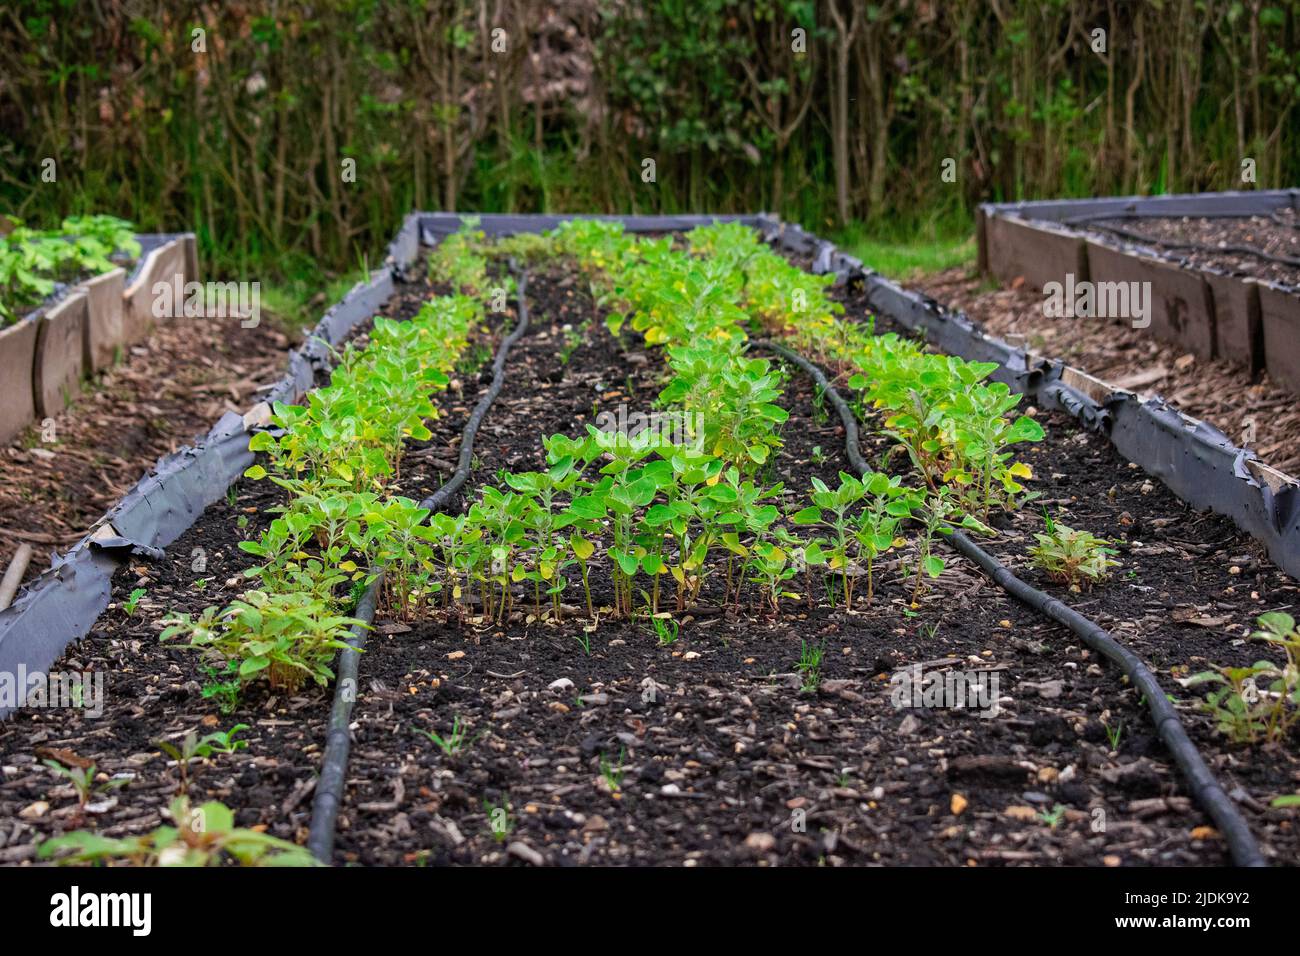 cultivation of small plants in a nursery Stock Photo